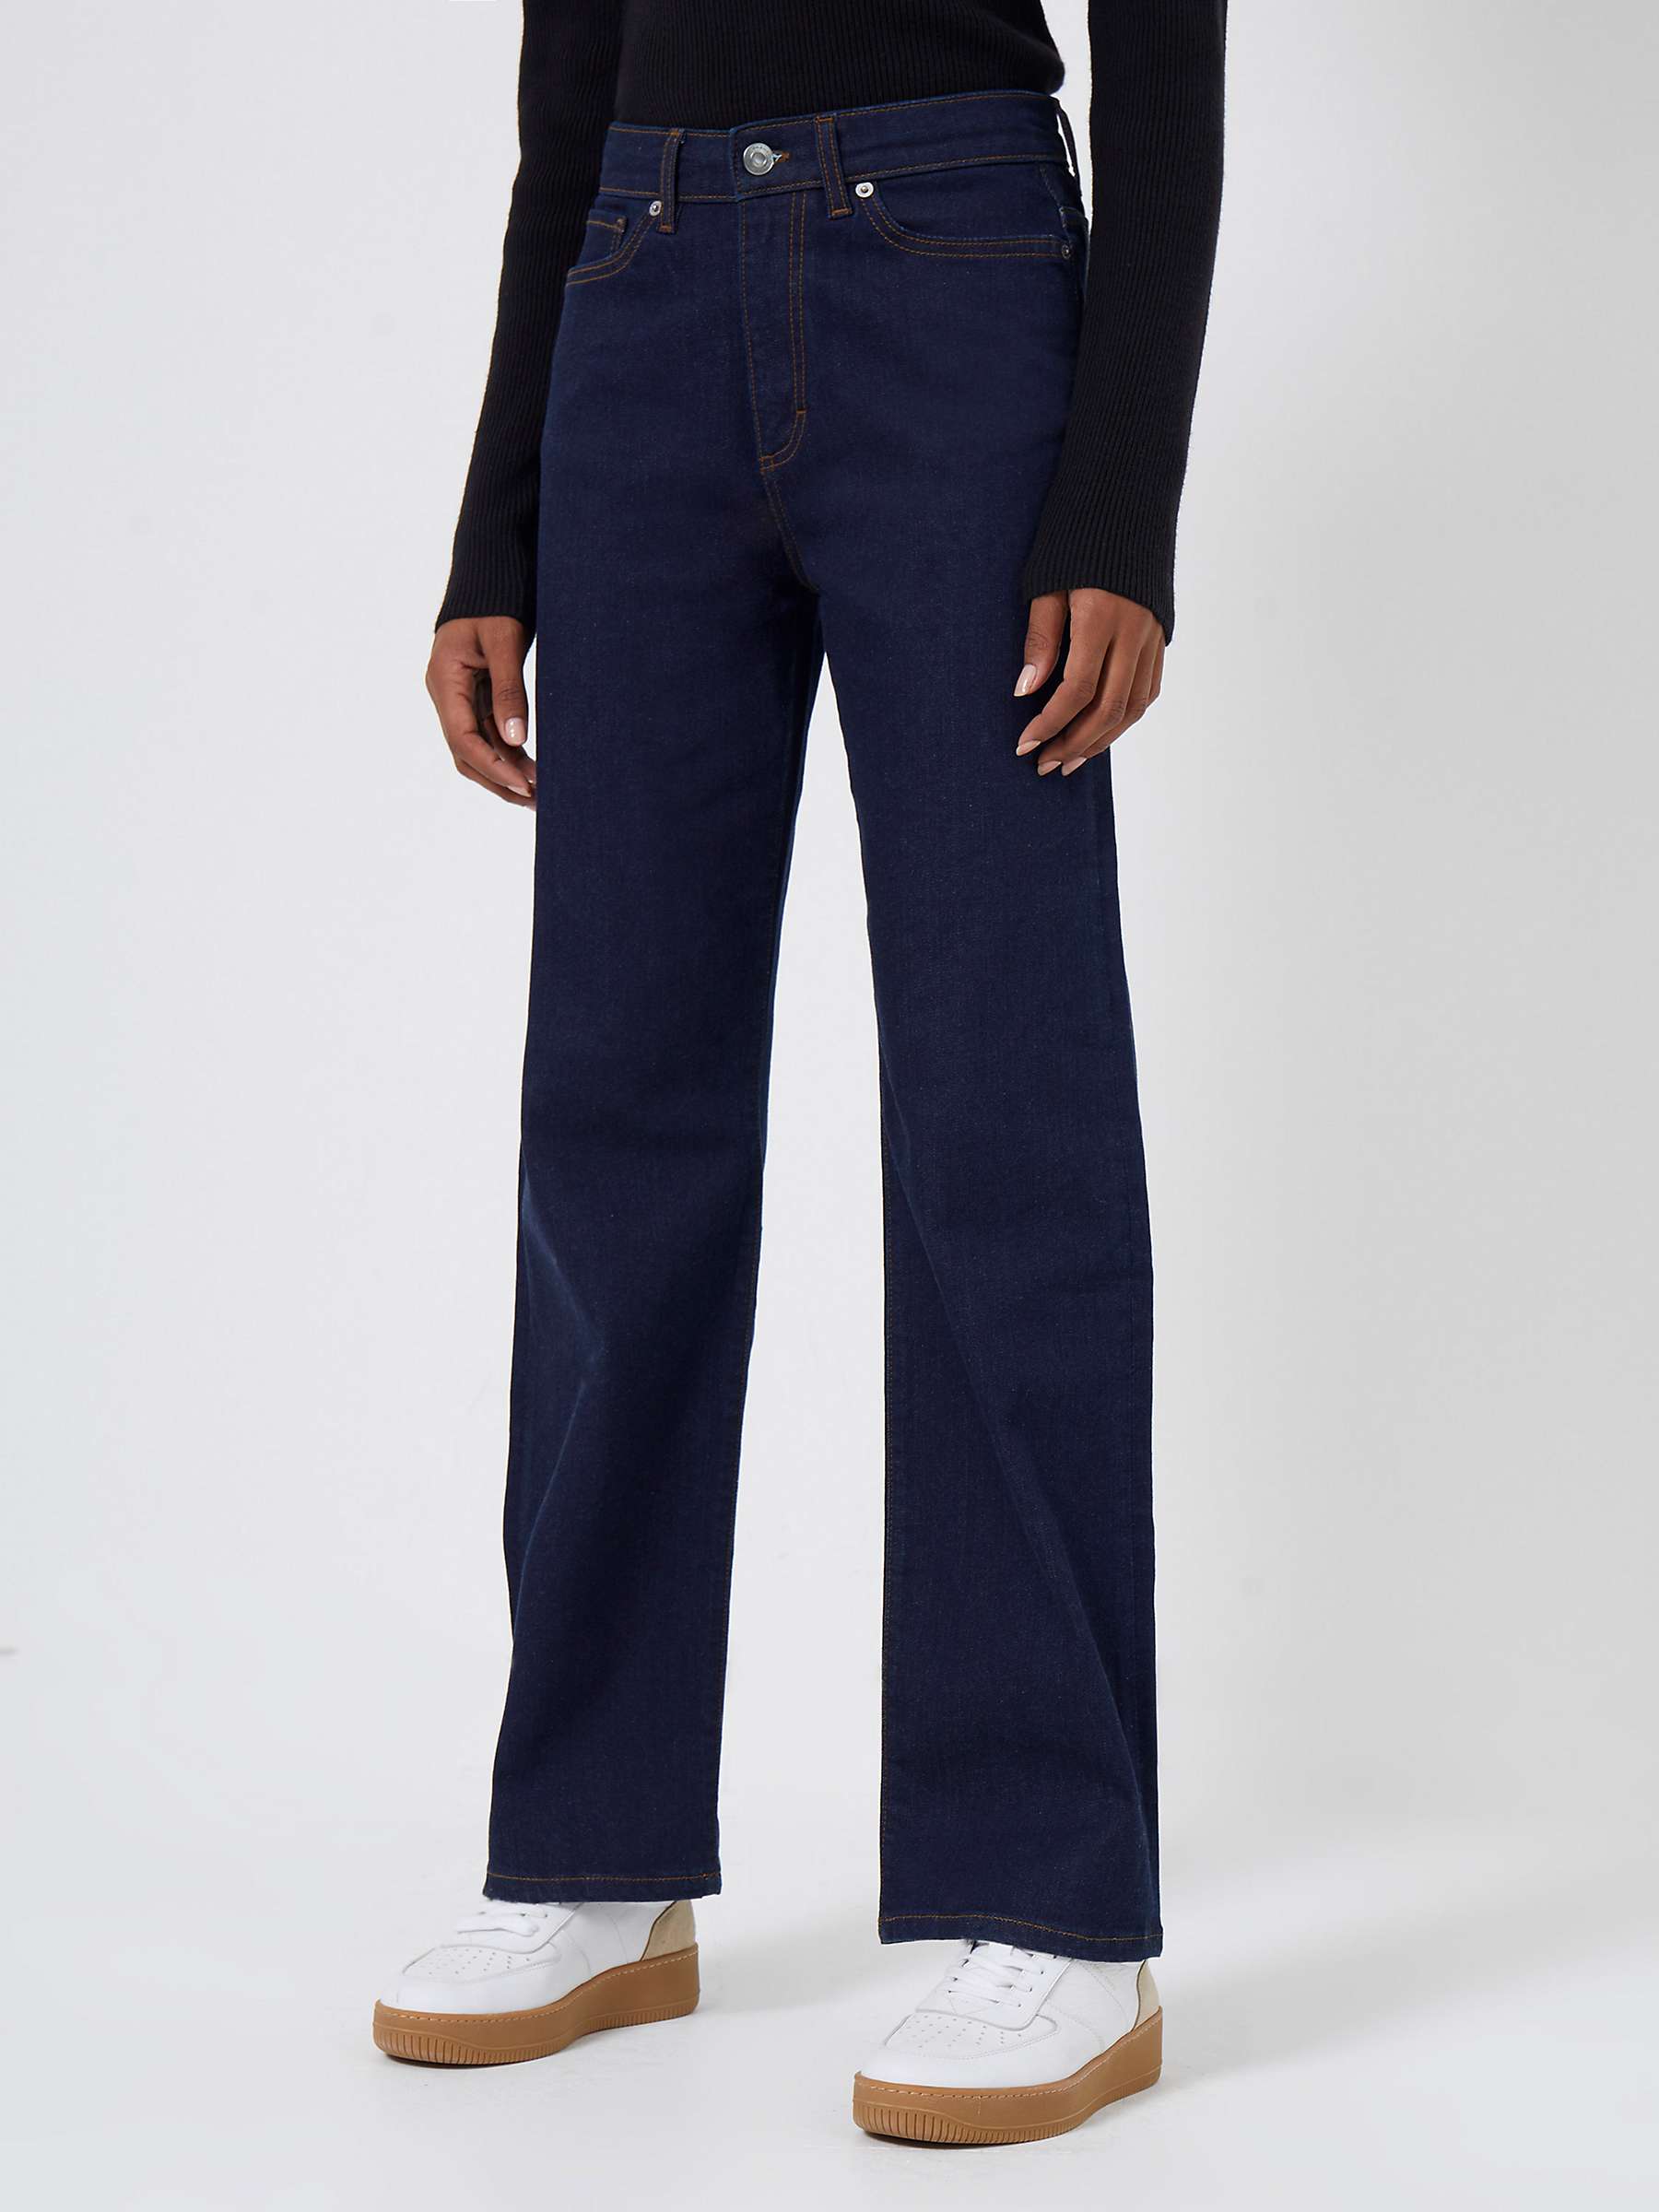 Buy French Connection Stretch Wide Leg Jeans, Clean Indigo Online at johnlewis.com